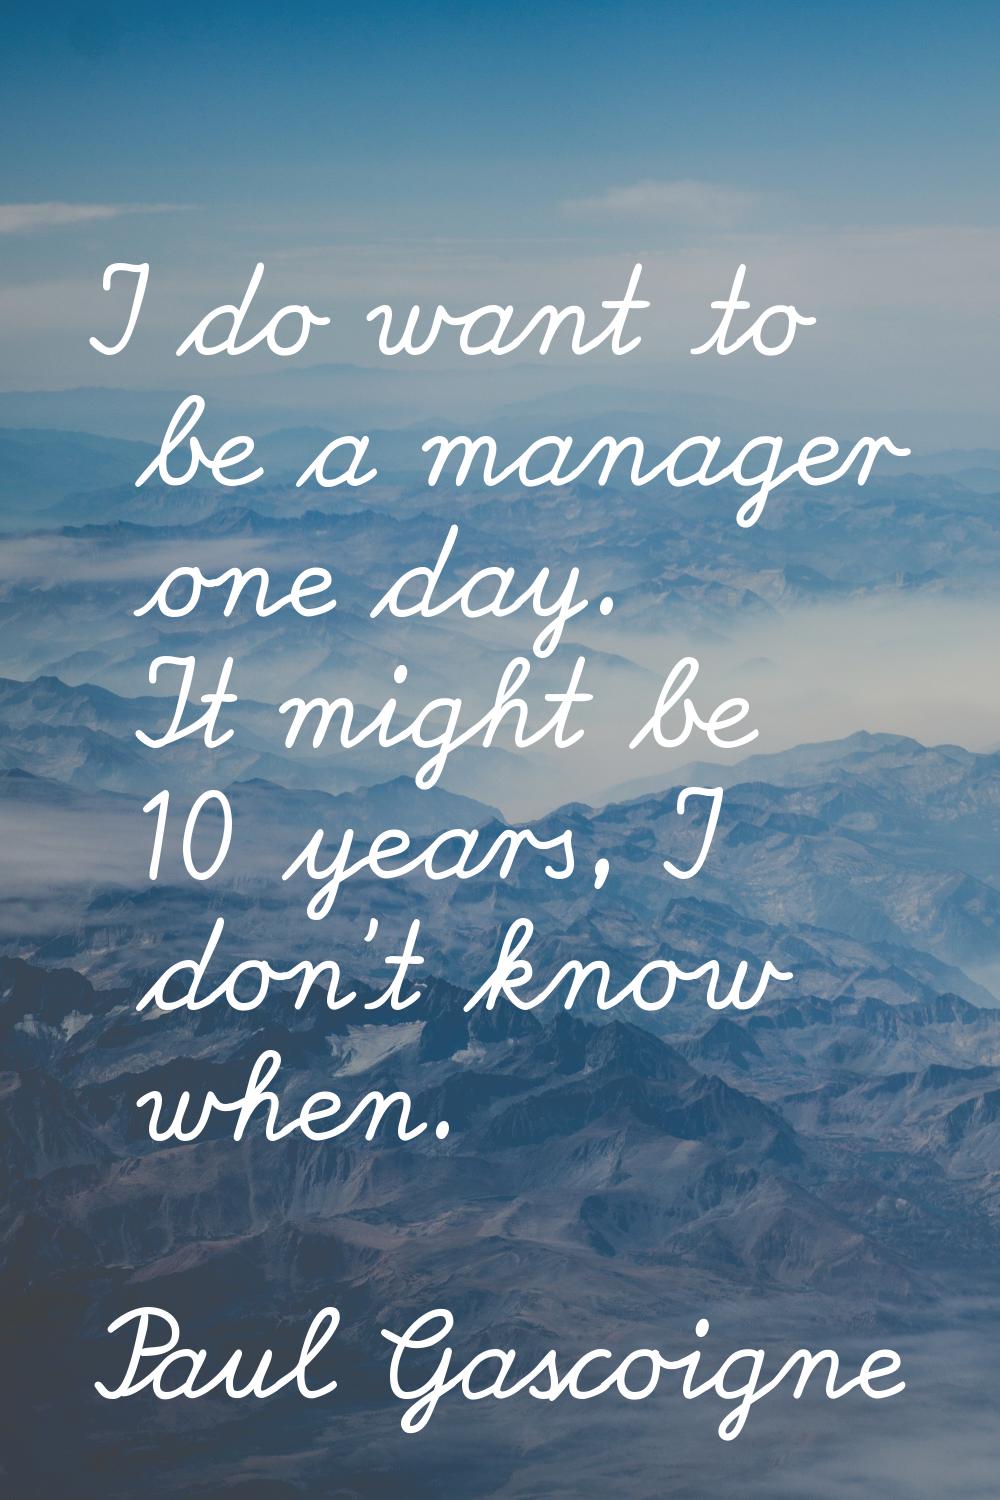 I do want to be a manager one day. It might be 10 years, I don't know when.